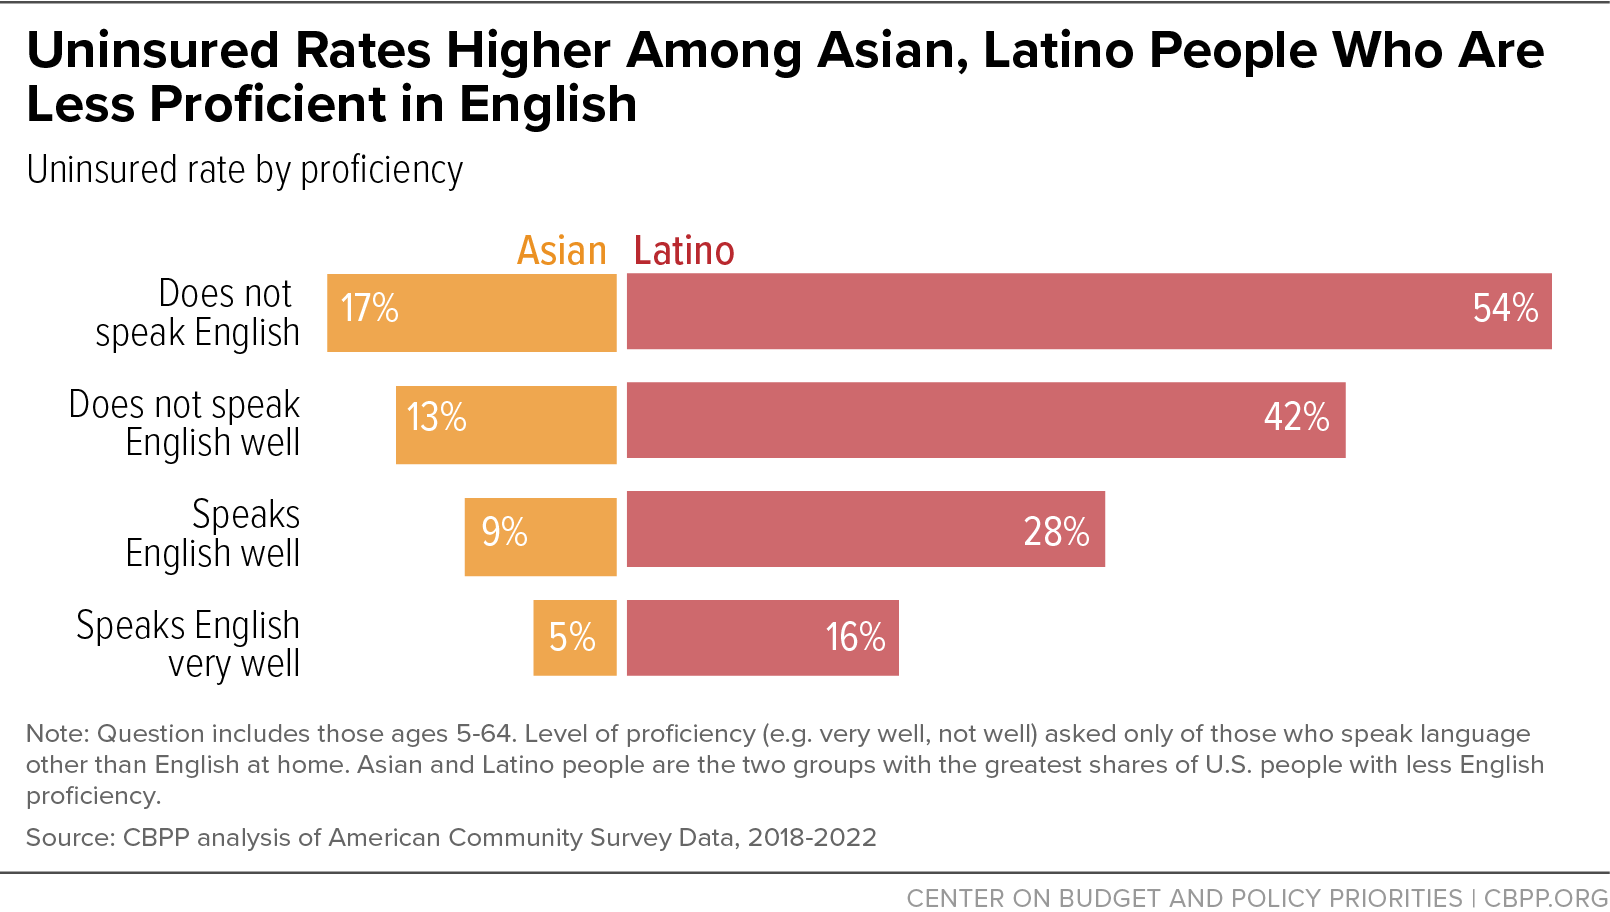 Uninsured Rates Higher Among Asian, Latino People Who Are Less Proficient in English